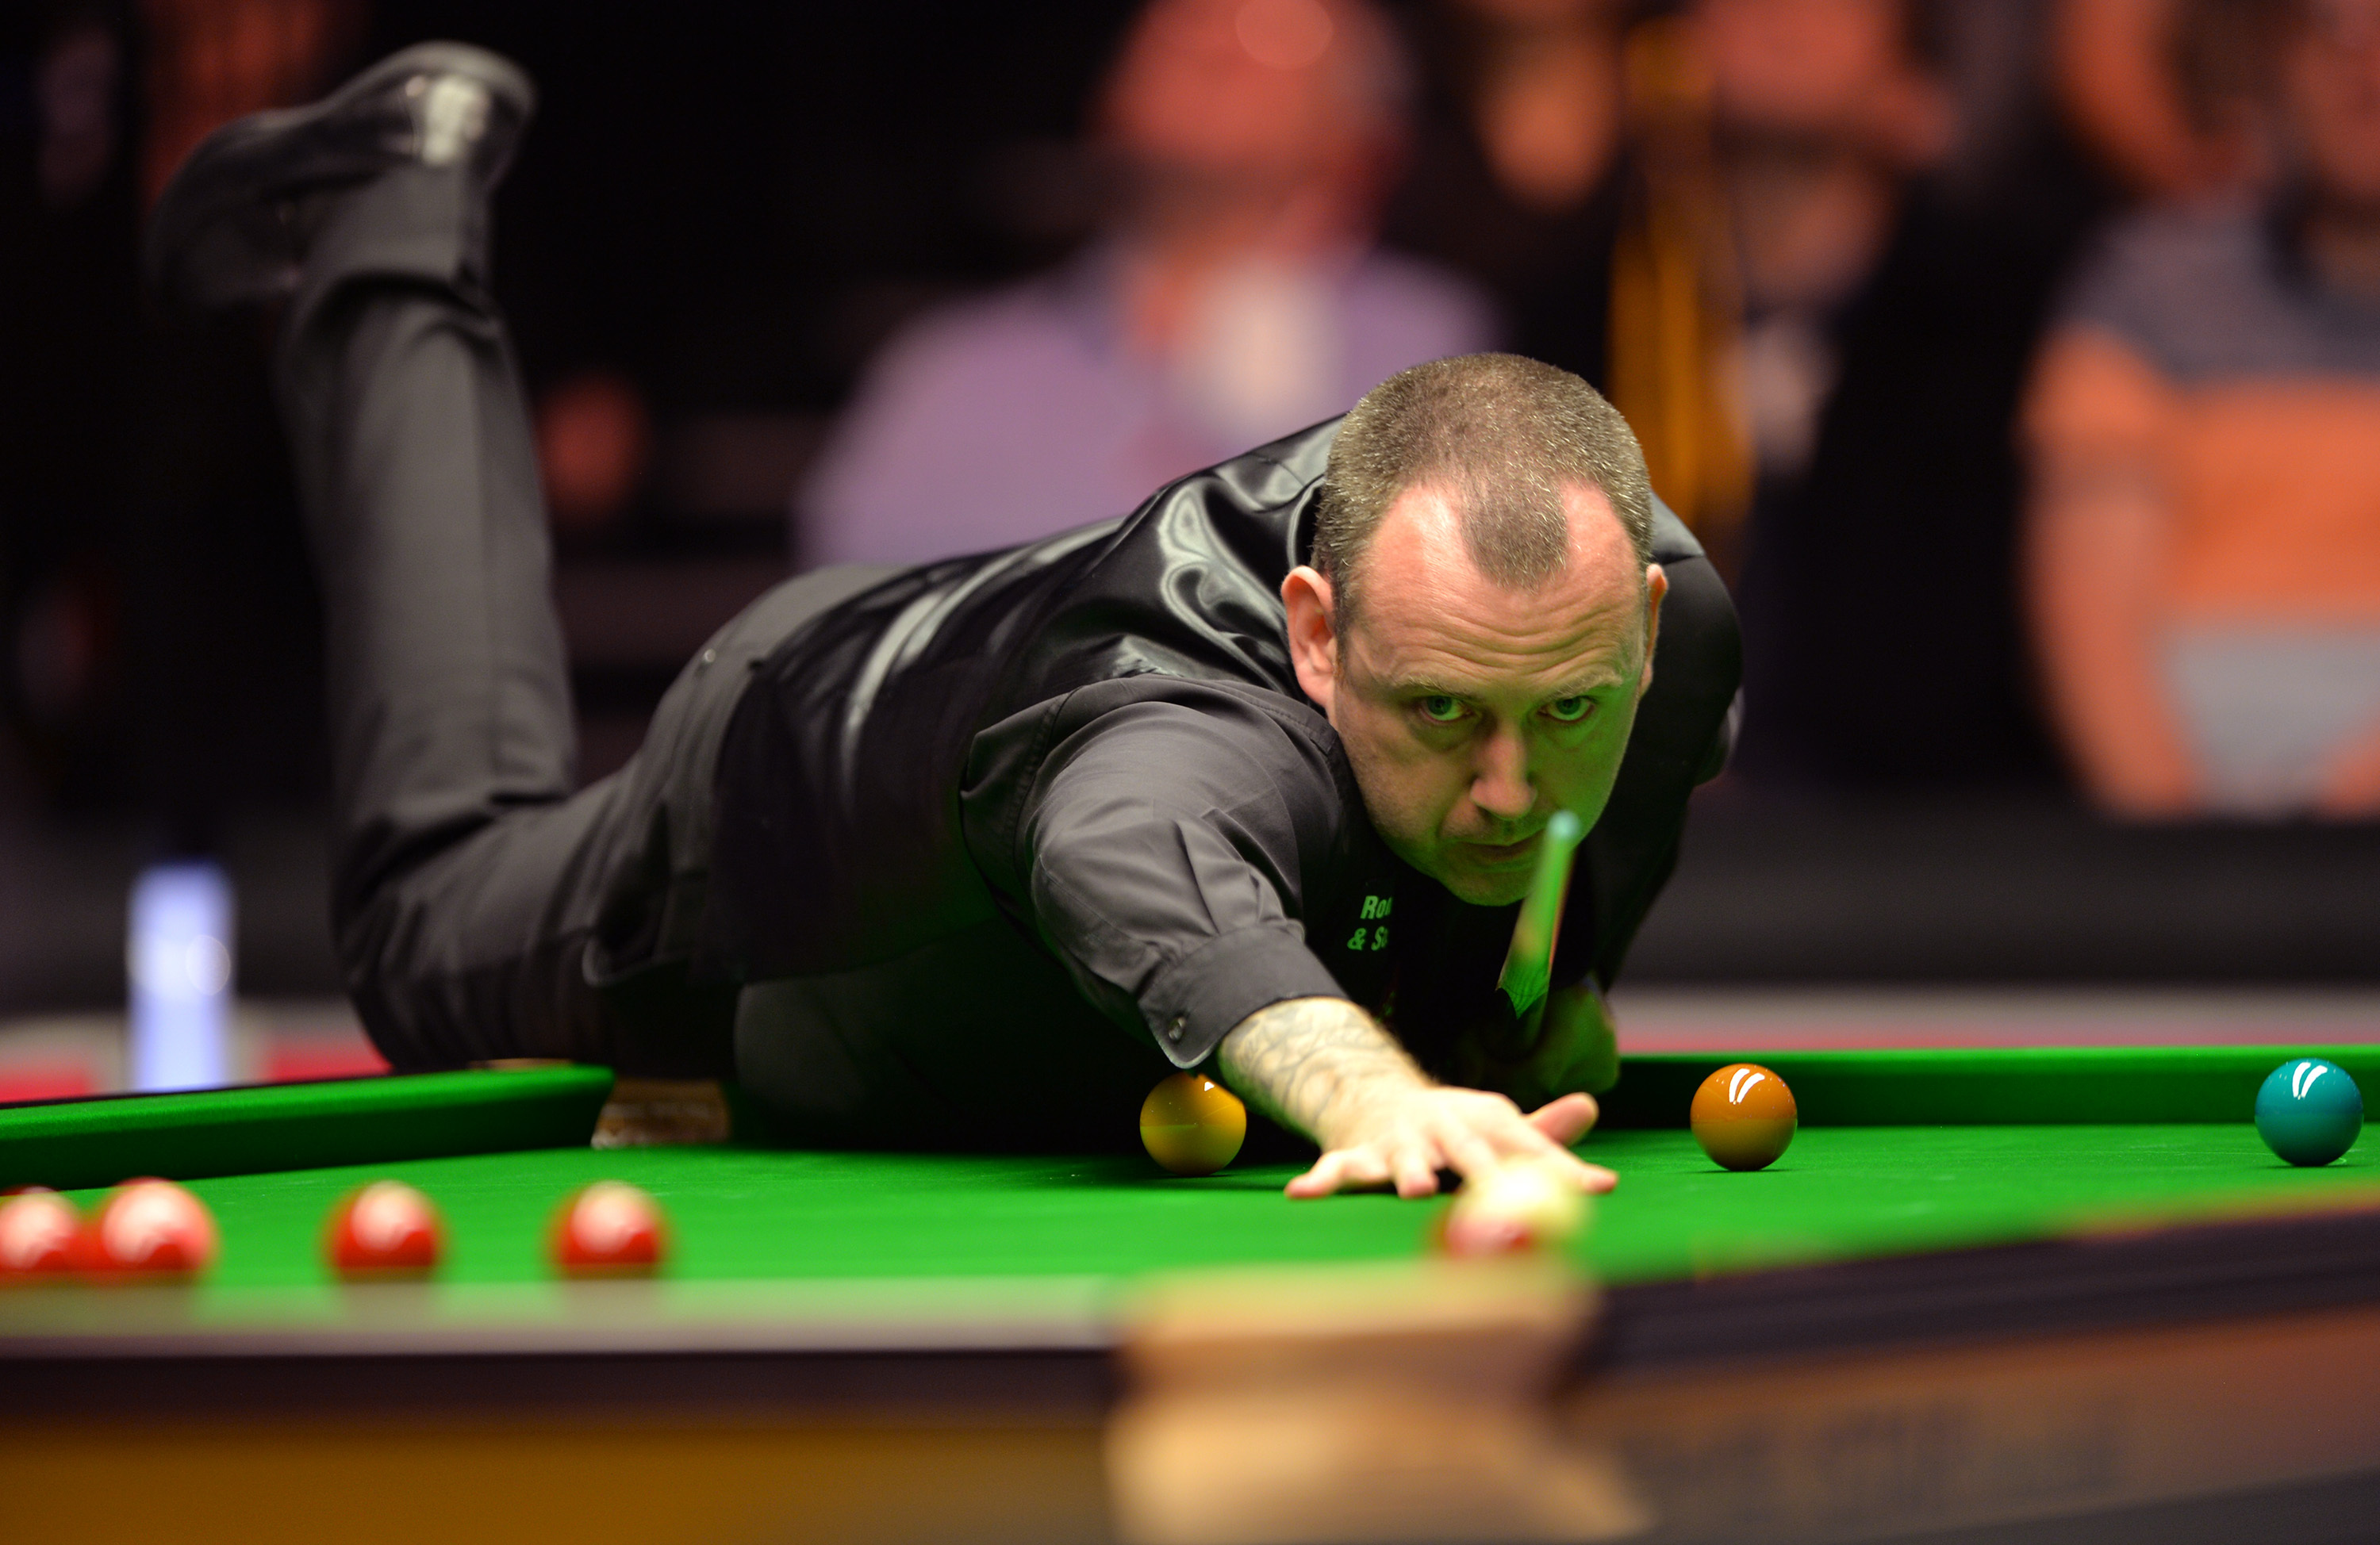 Northern Ireland Open snooker 2017 Draw, schedule, results, betting odds, Eurosport TV times and tickets